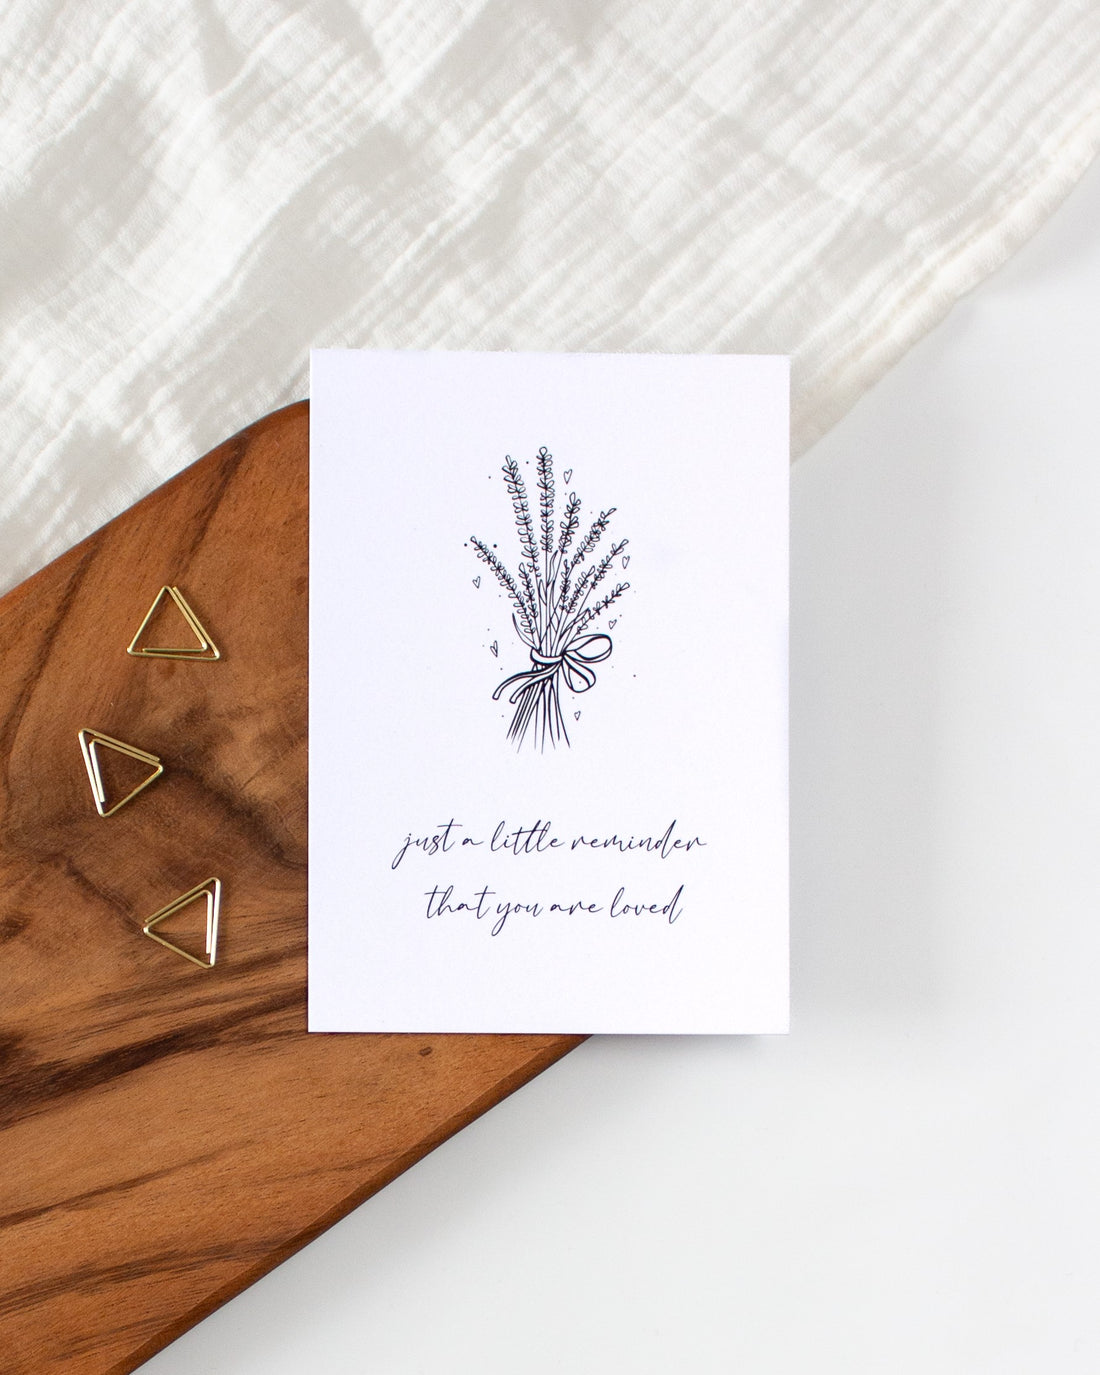 A postcard laying on a wooden board with some golden triangle paperclips and a white cloth in the background. The postcard design has a line art drawing of a flower bouquet with little hearts. Below that are two lines of cursive writing saying &quot;Just a little reminder that you are loved&quot;.